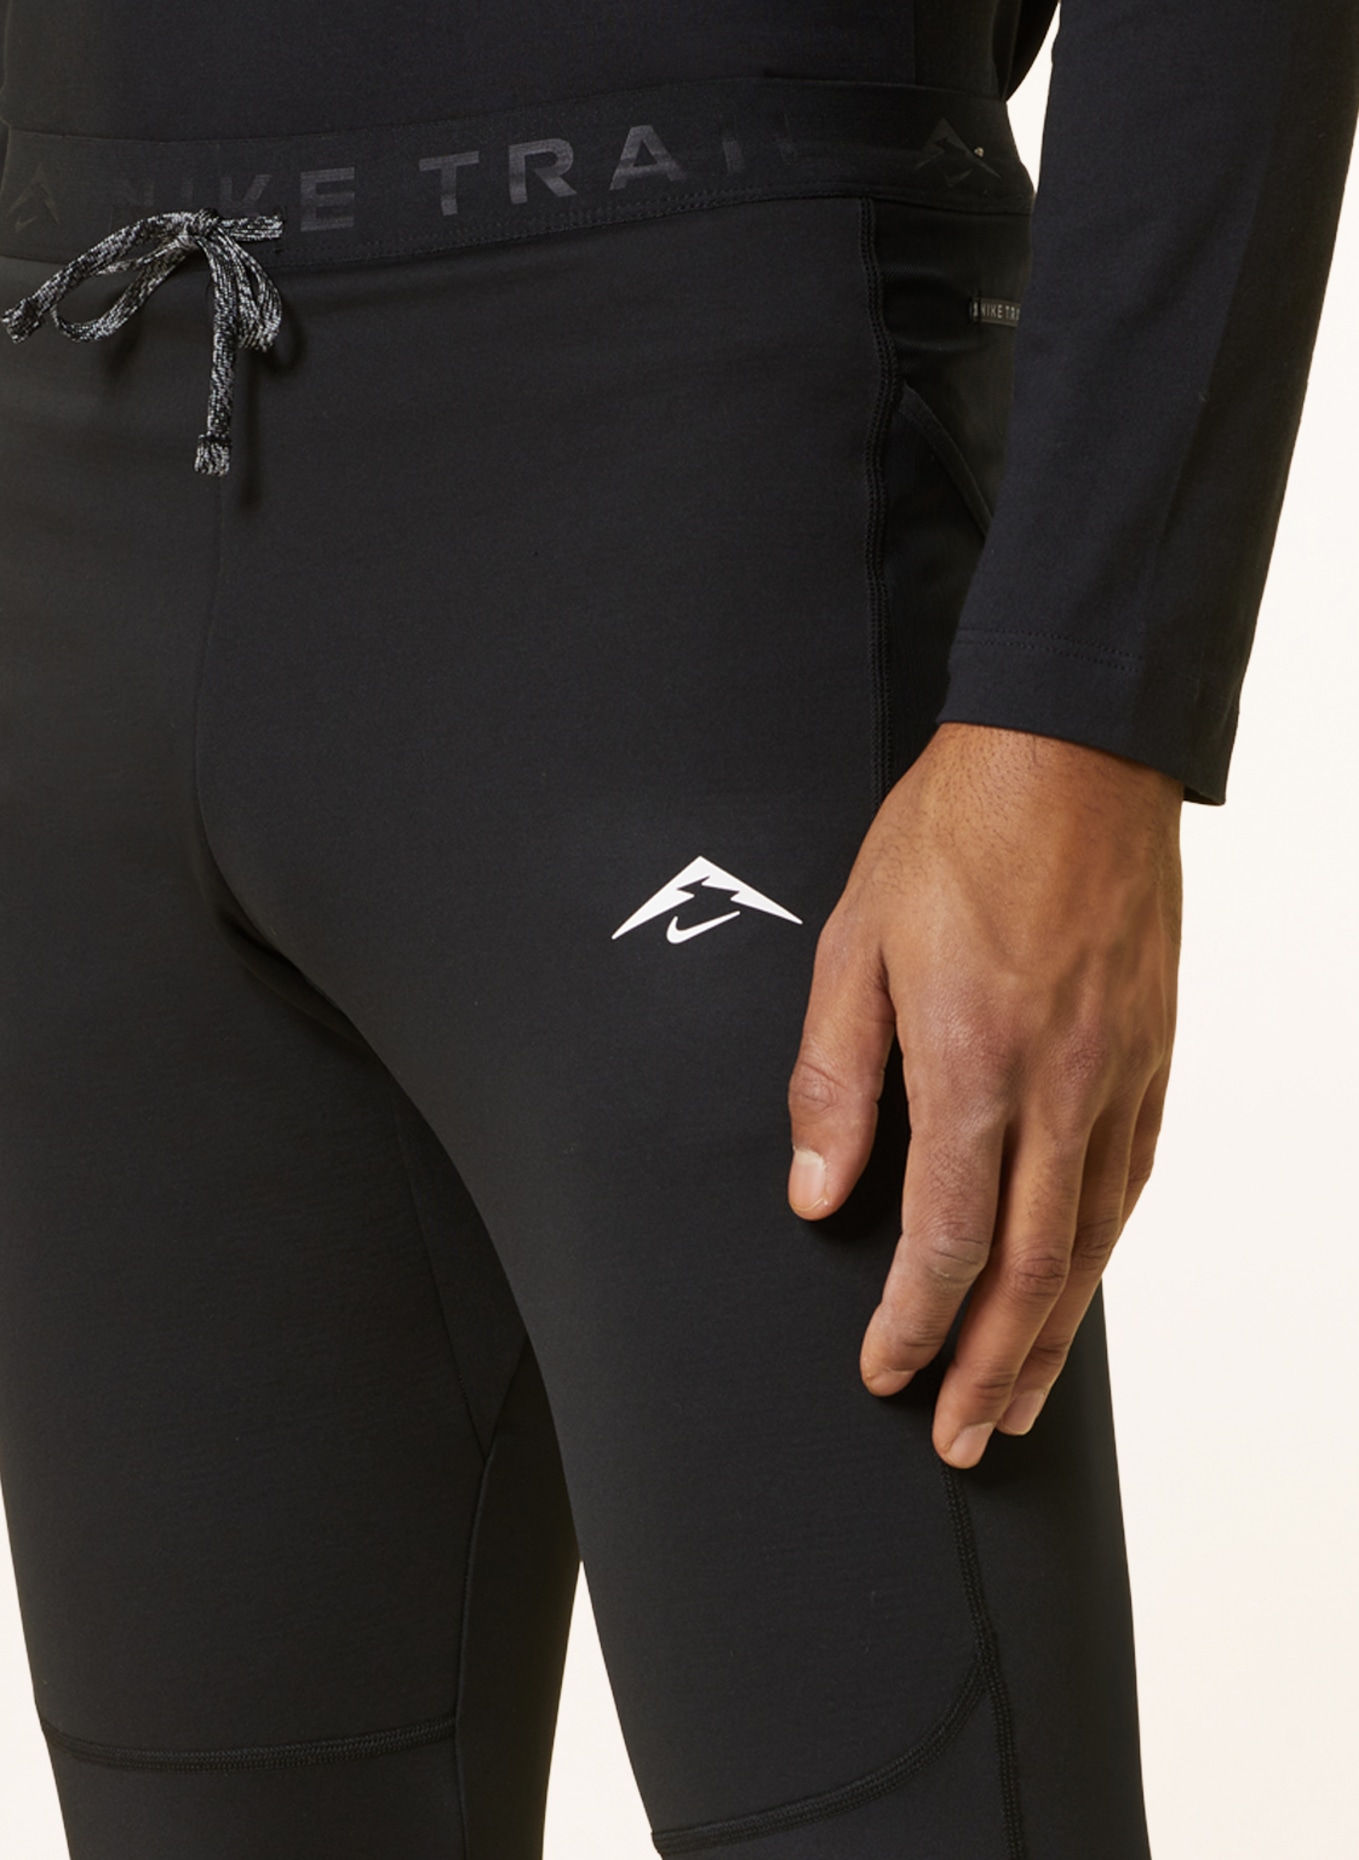 Nike Running tights LUNAR RAY, Color: BLACK (Image 6)